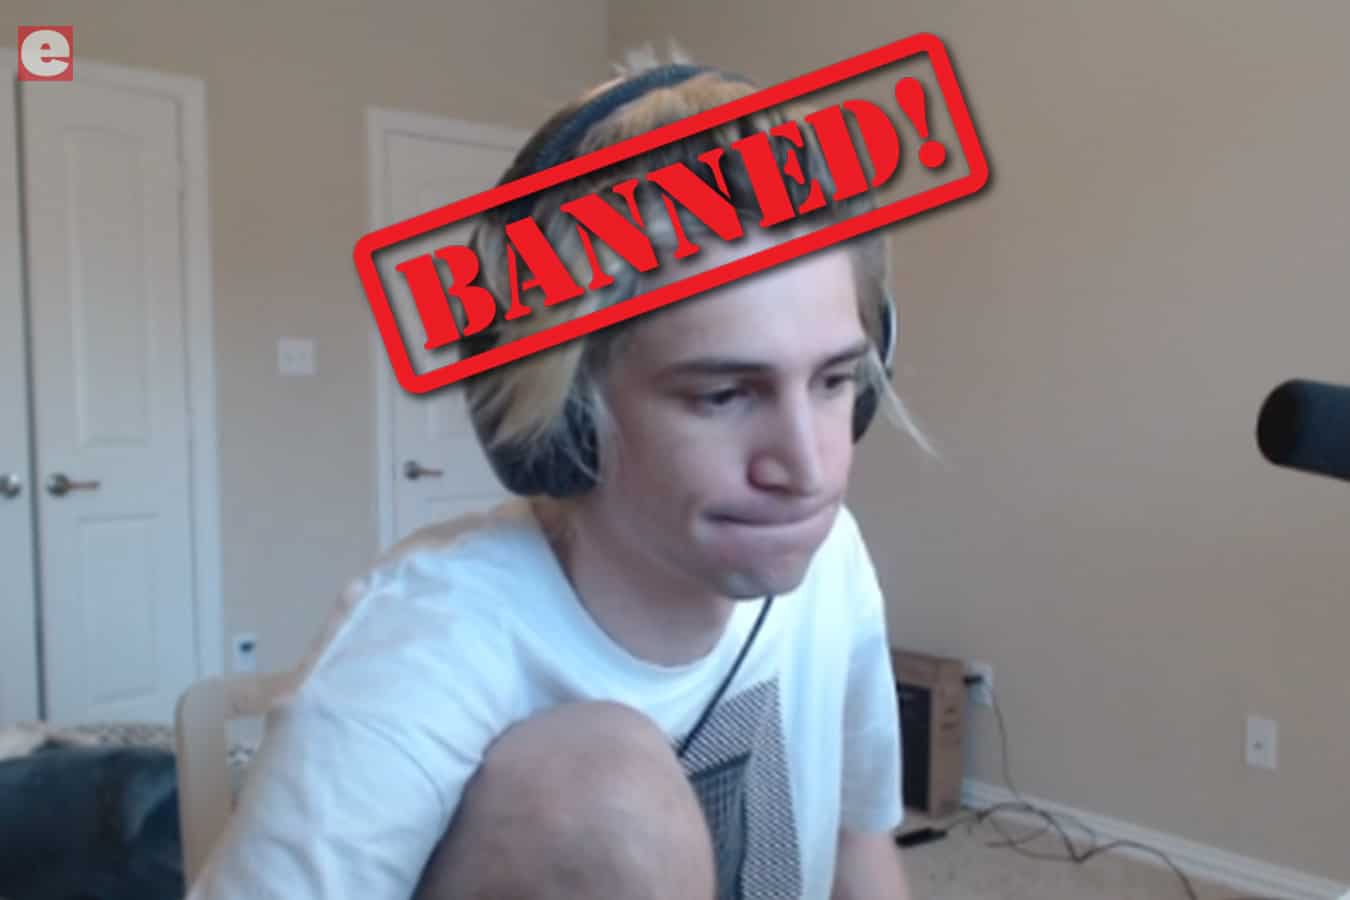 clix banned on twitch